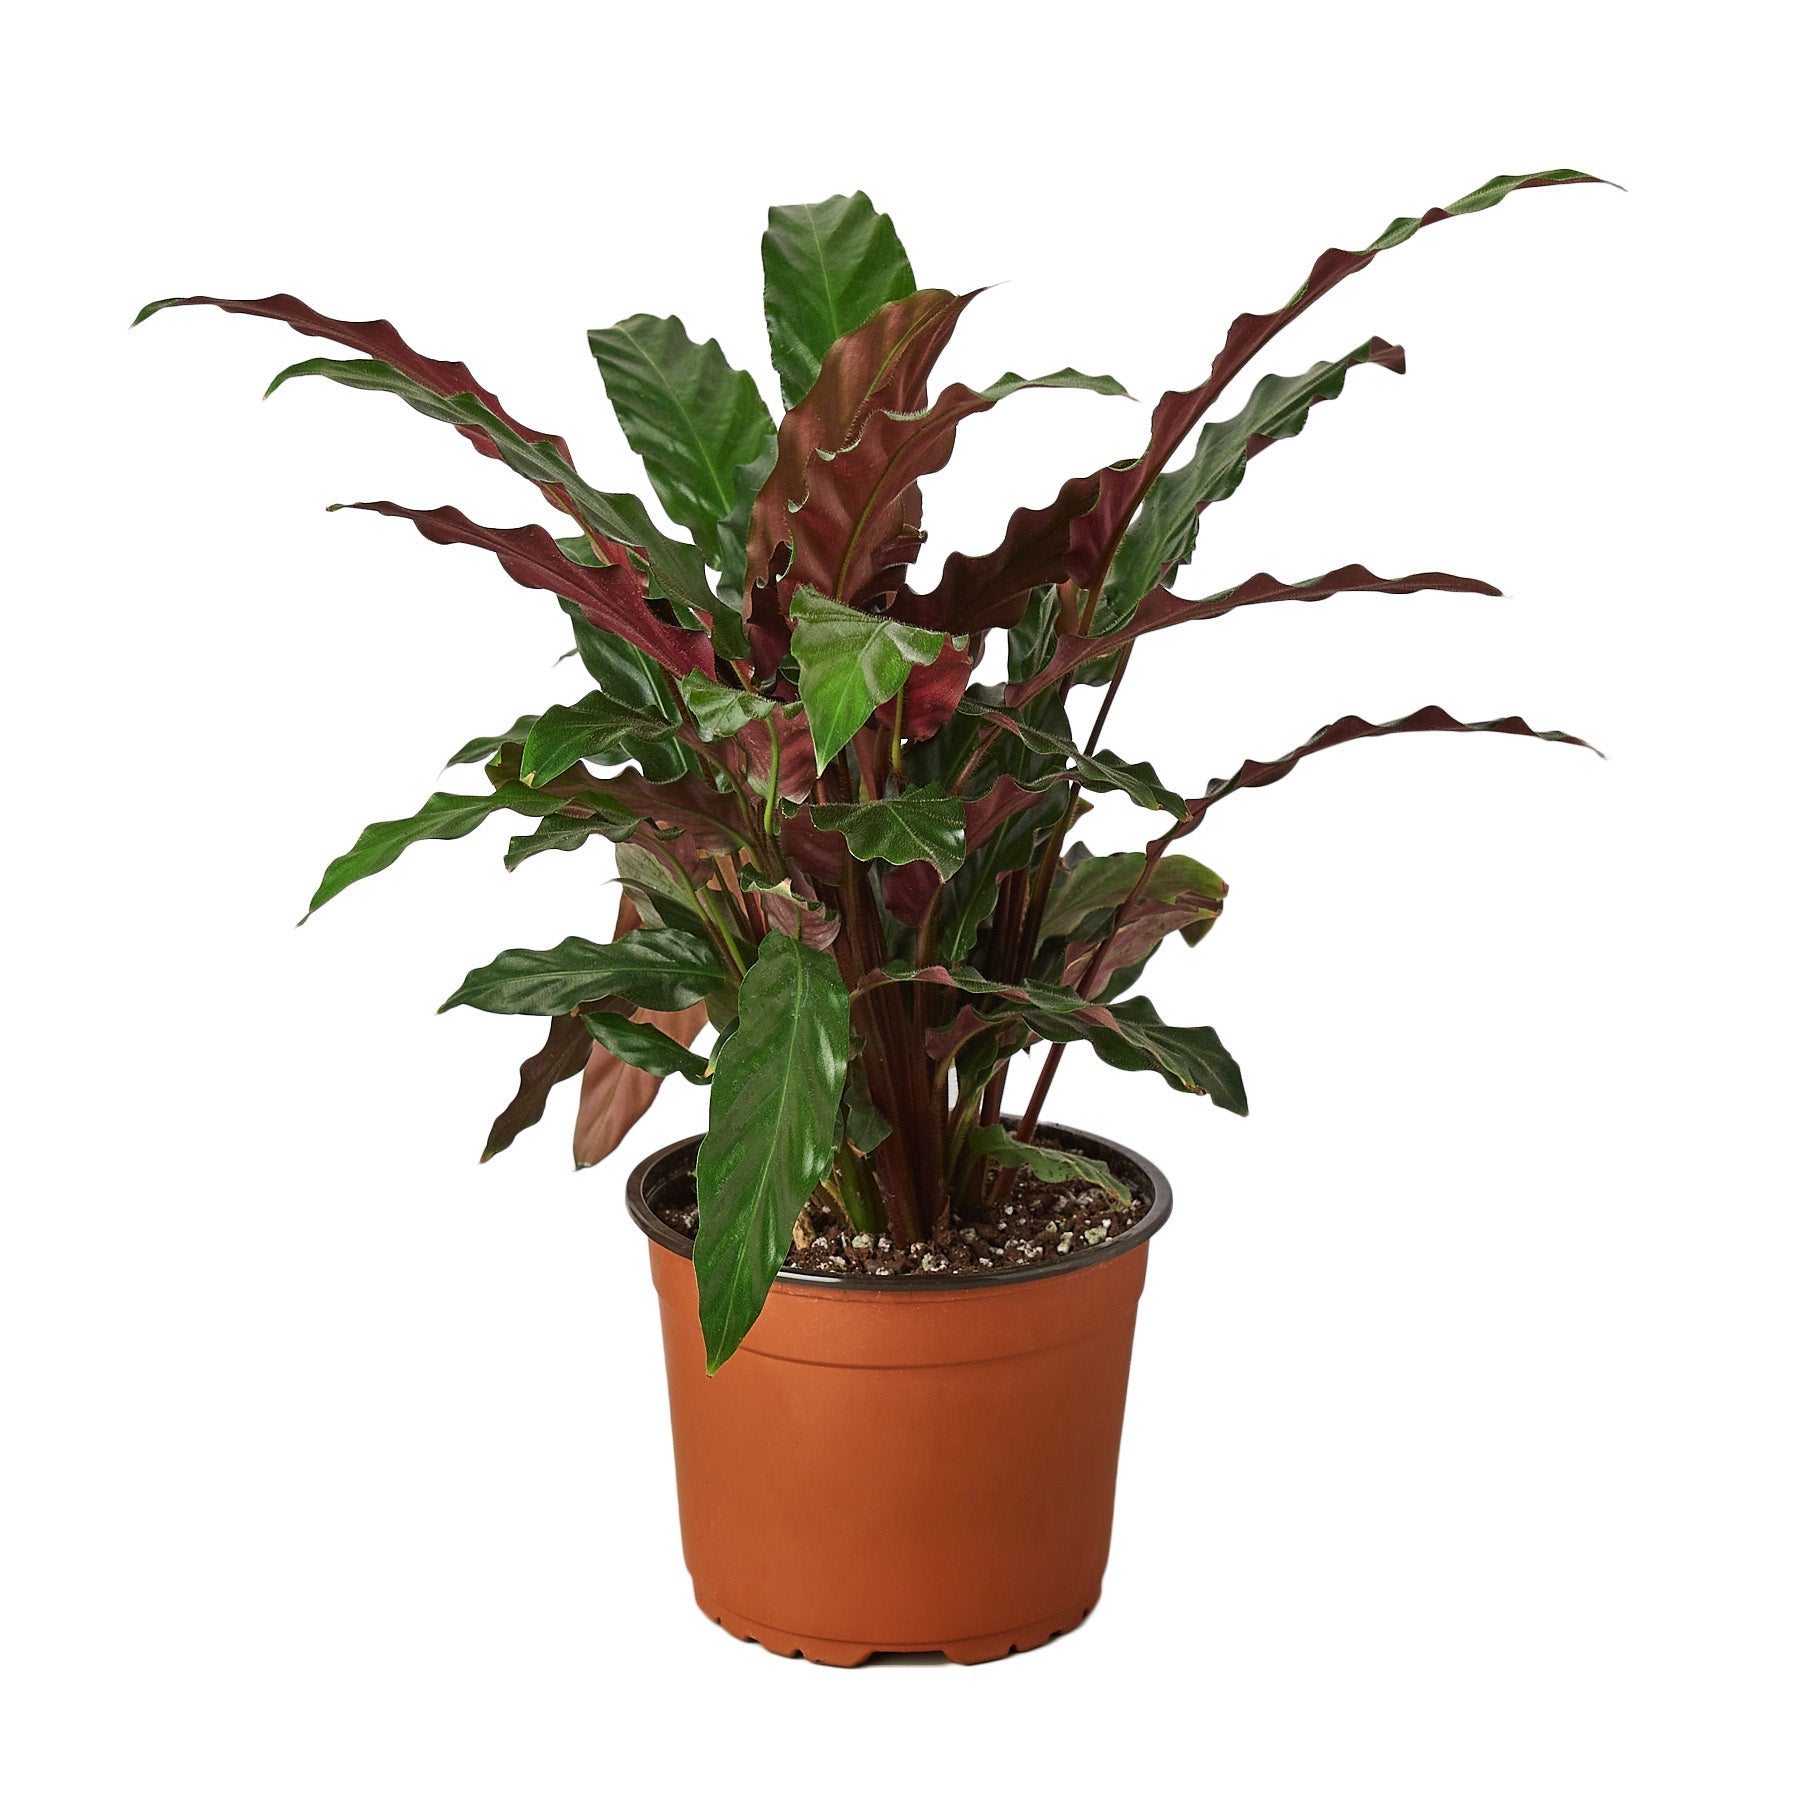 A vibrant plant in a brown pot with red leaves, available at the top garden centers near me.